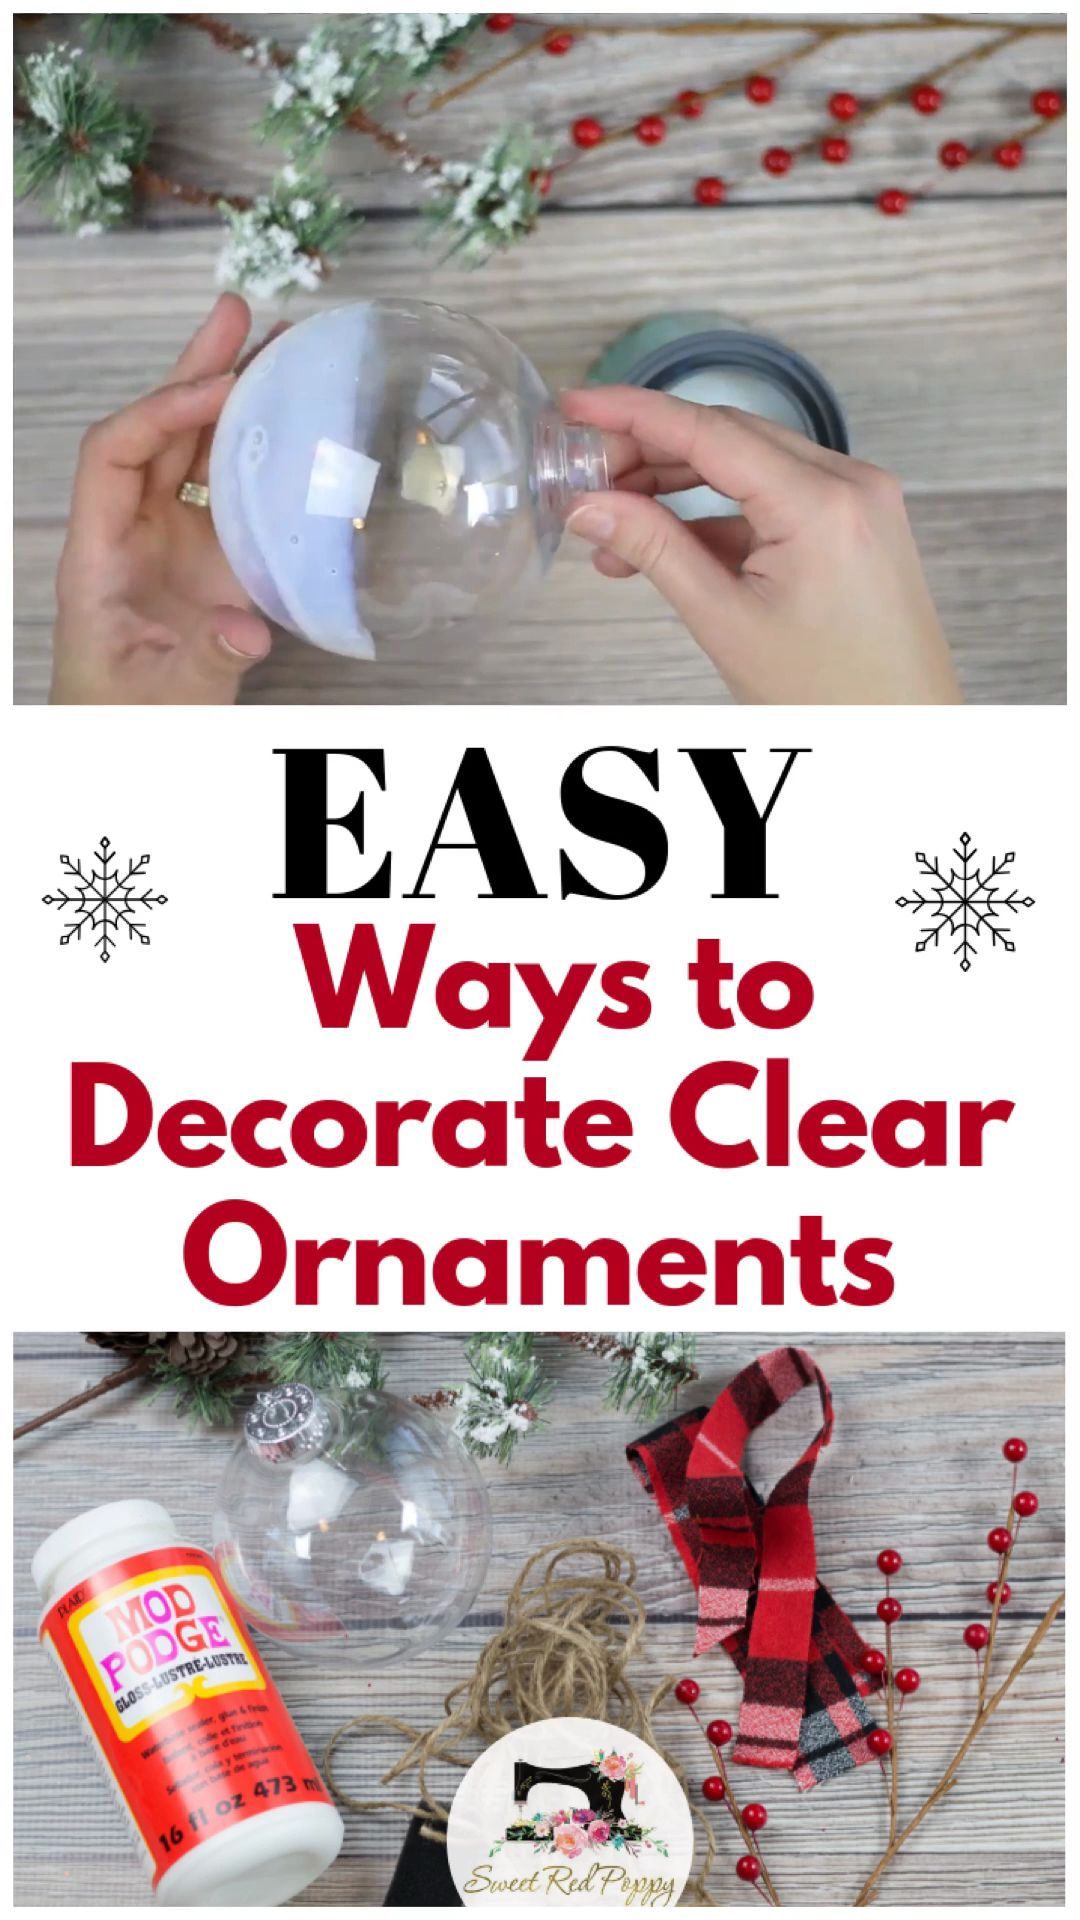 Easy Ways to Decorate Clear Plastic Ornaments for Christmas - Sweet Red Poppy - Easy Ways to Decorate Clear Plastic Ornaments for Christmas - Sweet Red Poppy -   17 diy Christmas Decorations for outside ideas